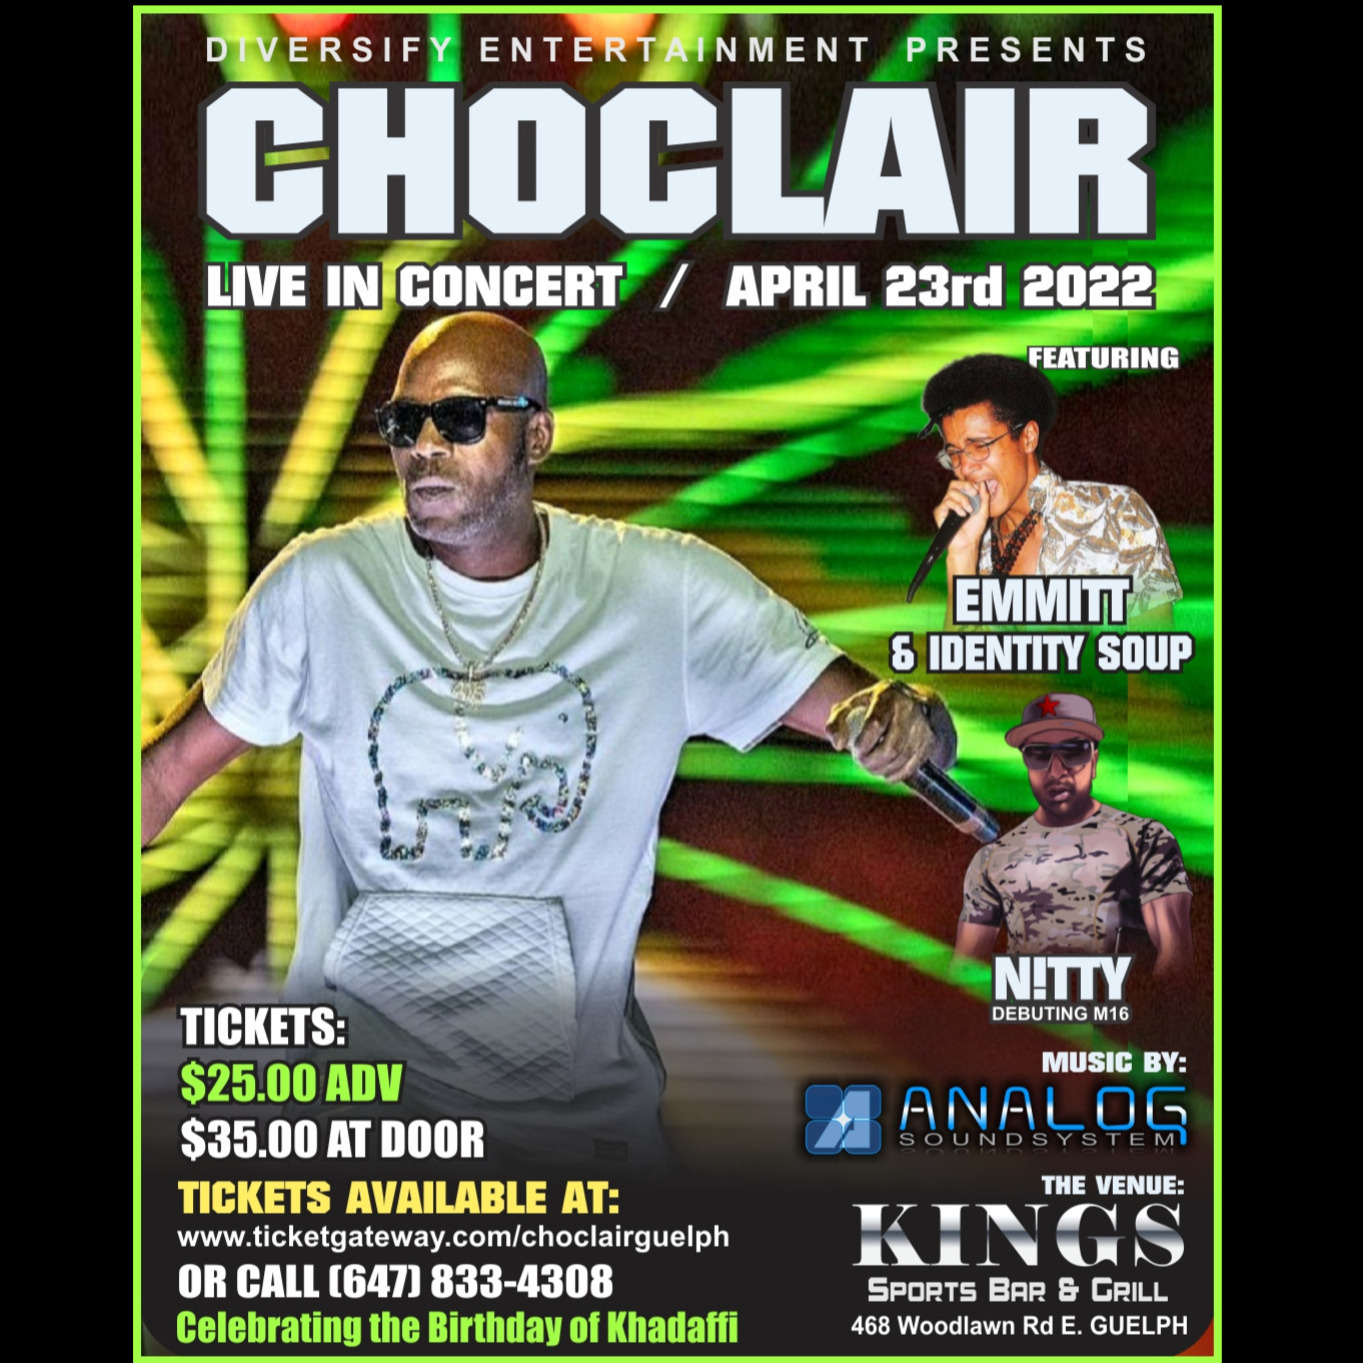 Choclair Live In Concert